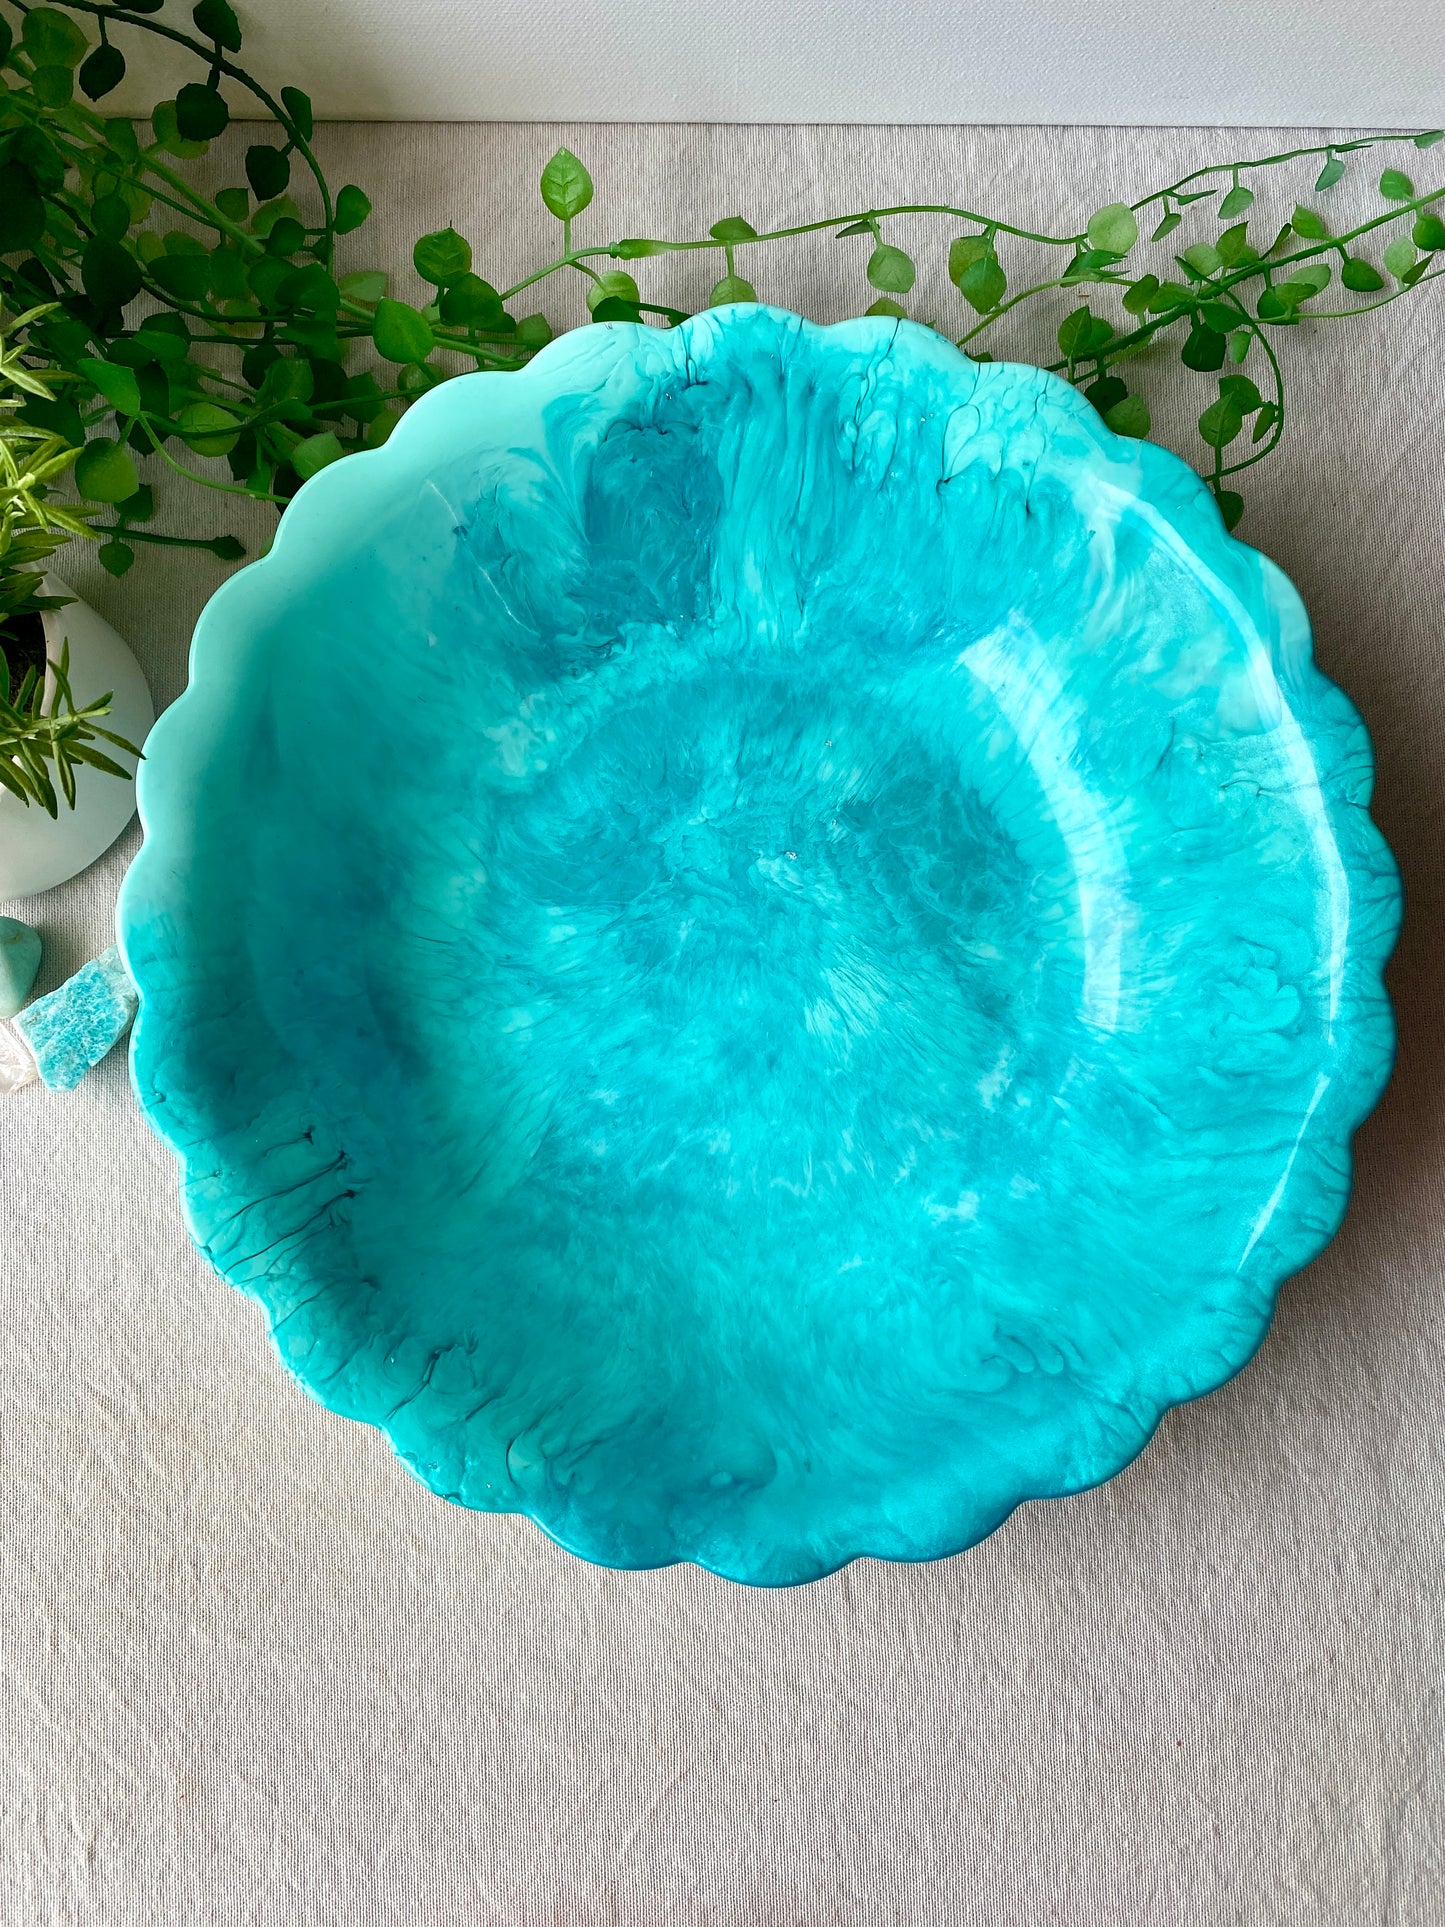 FRUIT BOWL - amazing aqua and teal large resin bowl - READY TO POST